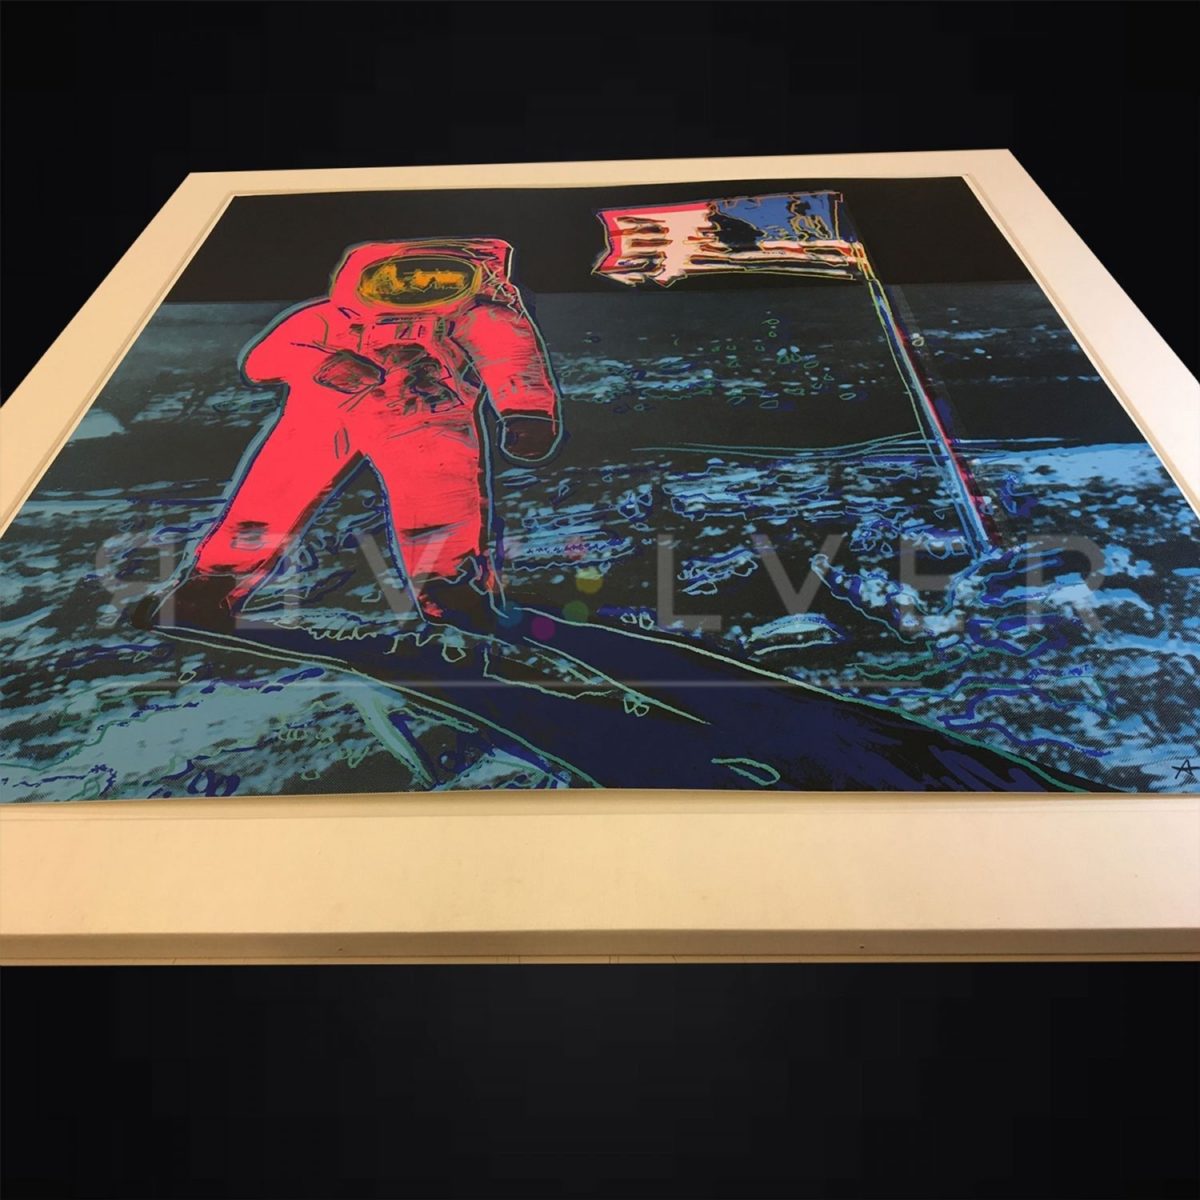 Andy Warhol Moonwalk 405 canvas laying on a table. Stock photo with Revolver Gallery watermark.